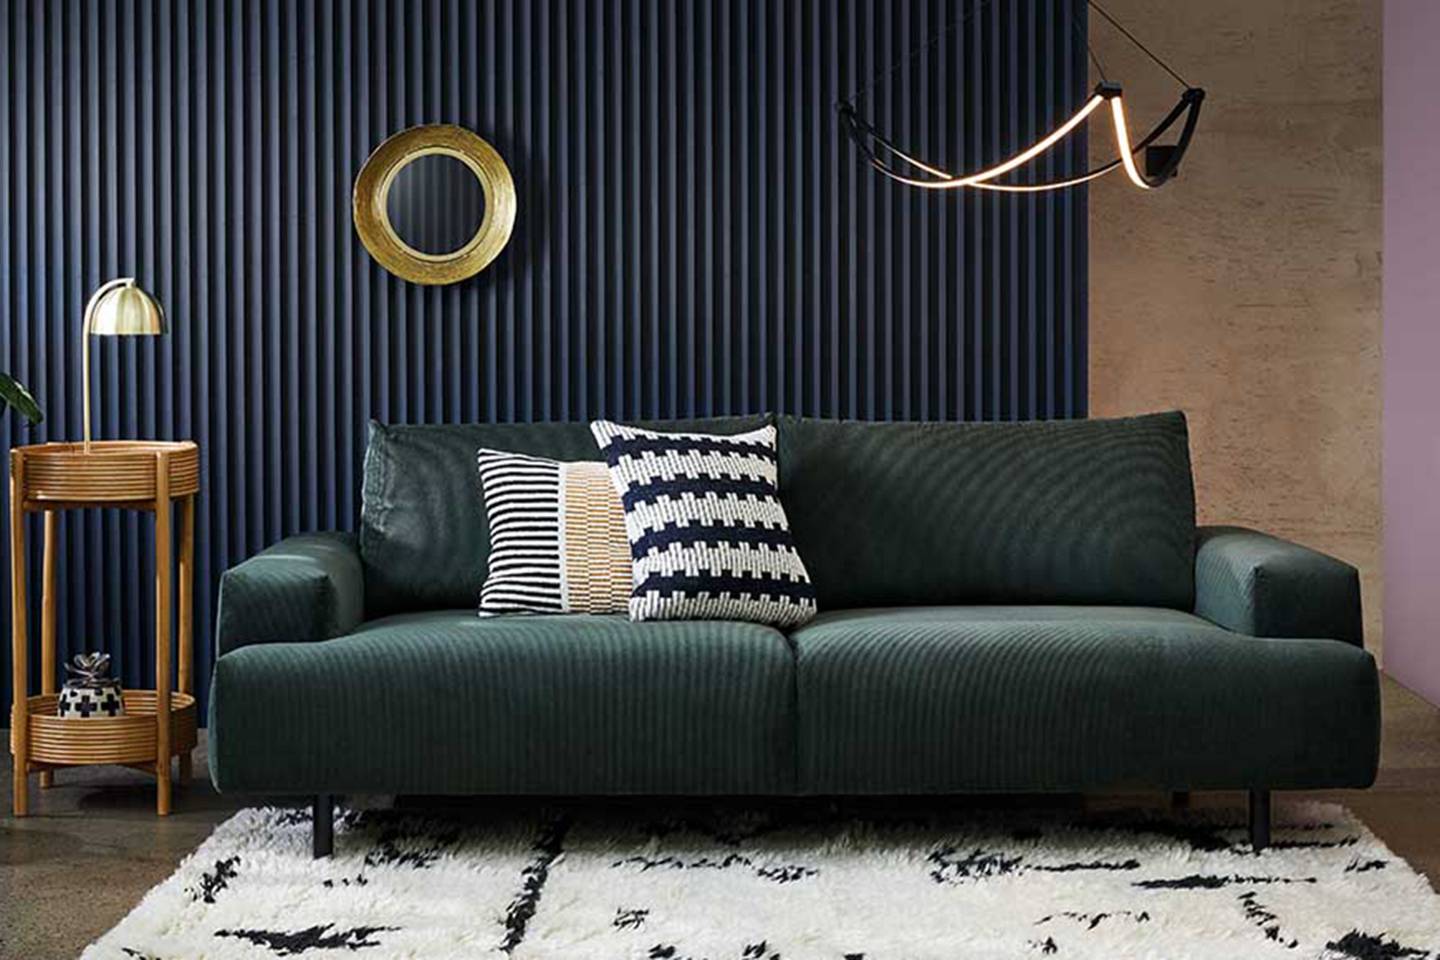 15 Best Online Furniture Stores: Interiors & Homeware for Every Budget